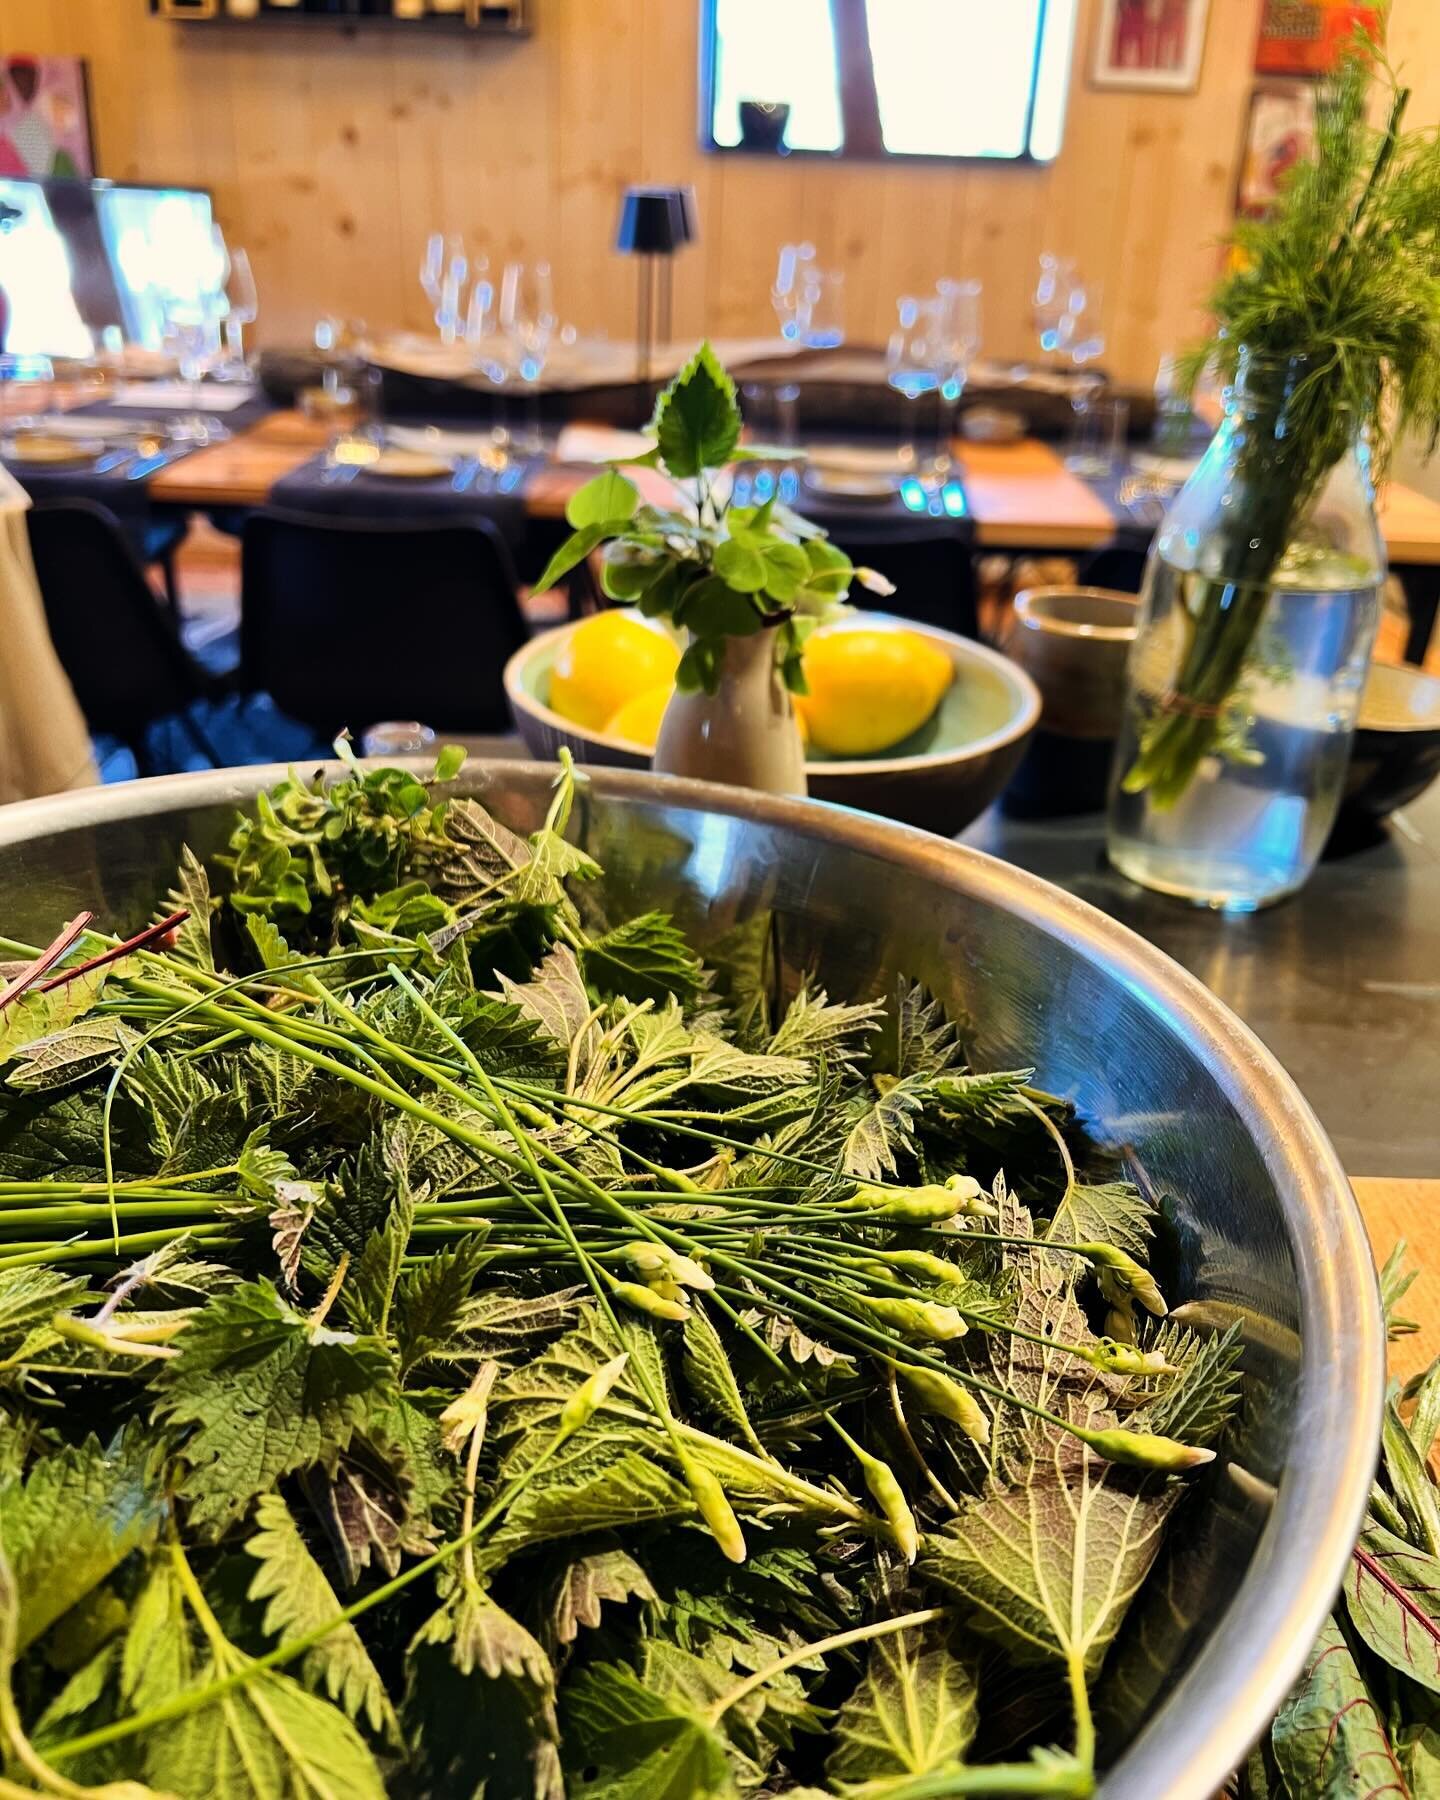 ABOUT LAST NIGHT 

A great group of wine lovers enjoyed a 4 course foraging wine pairing dinner in our @babarolo event room.  From local smoked trout to ramps, sorrel and nettles from the floor of the Black Forest, Piemonte hazelnuts and wines from @